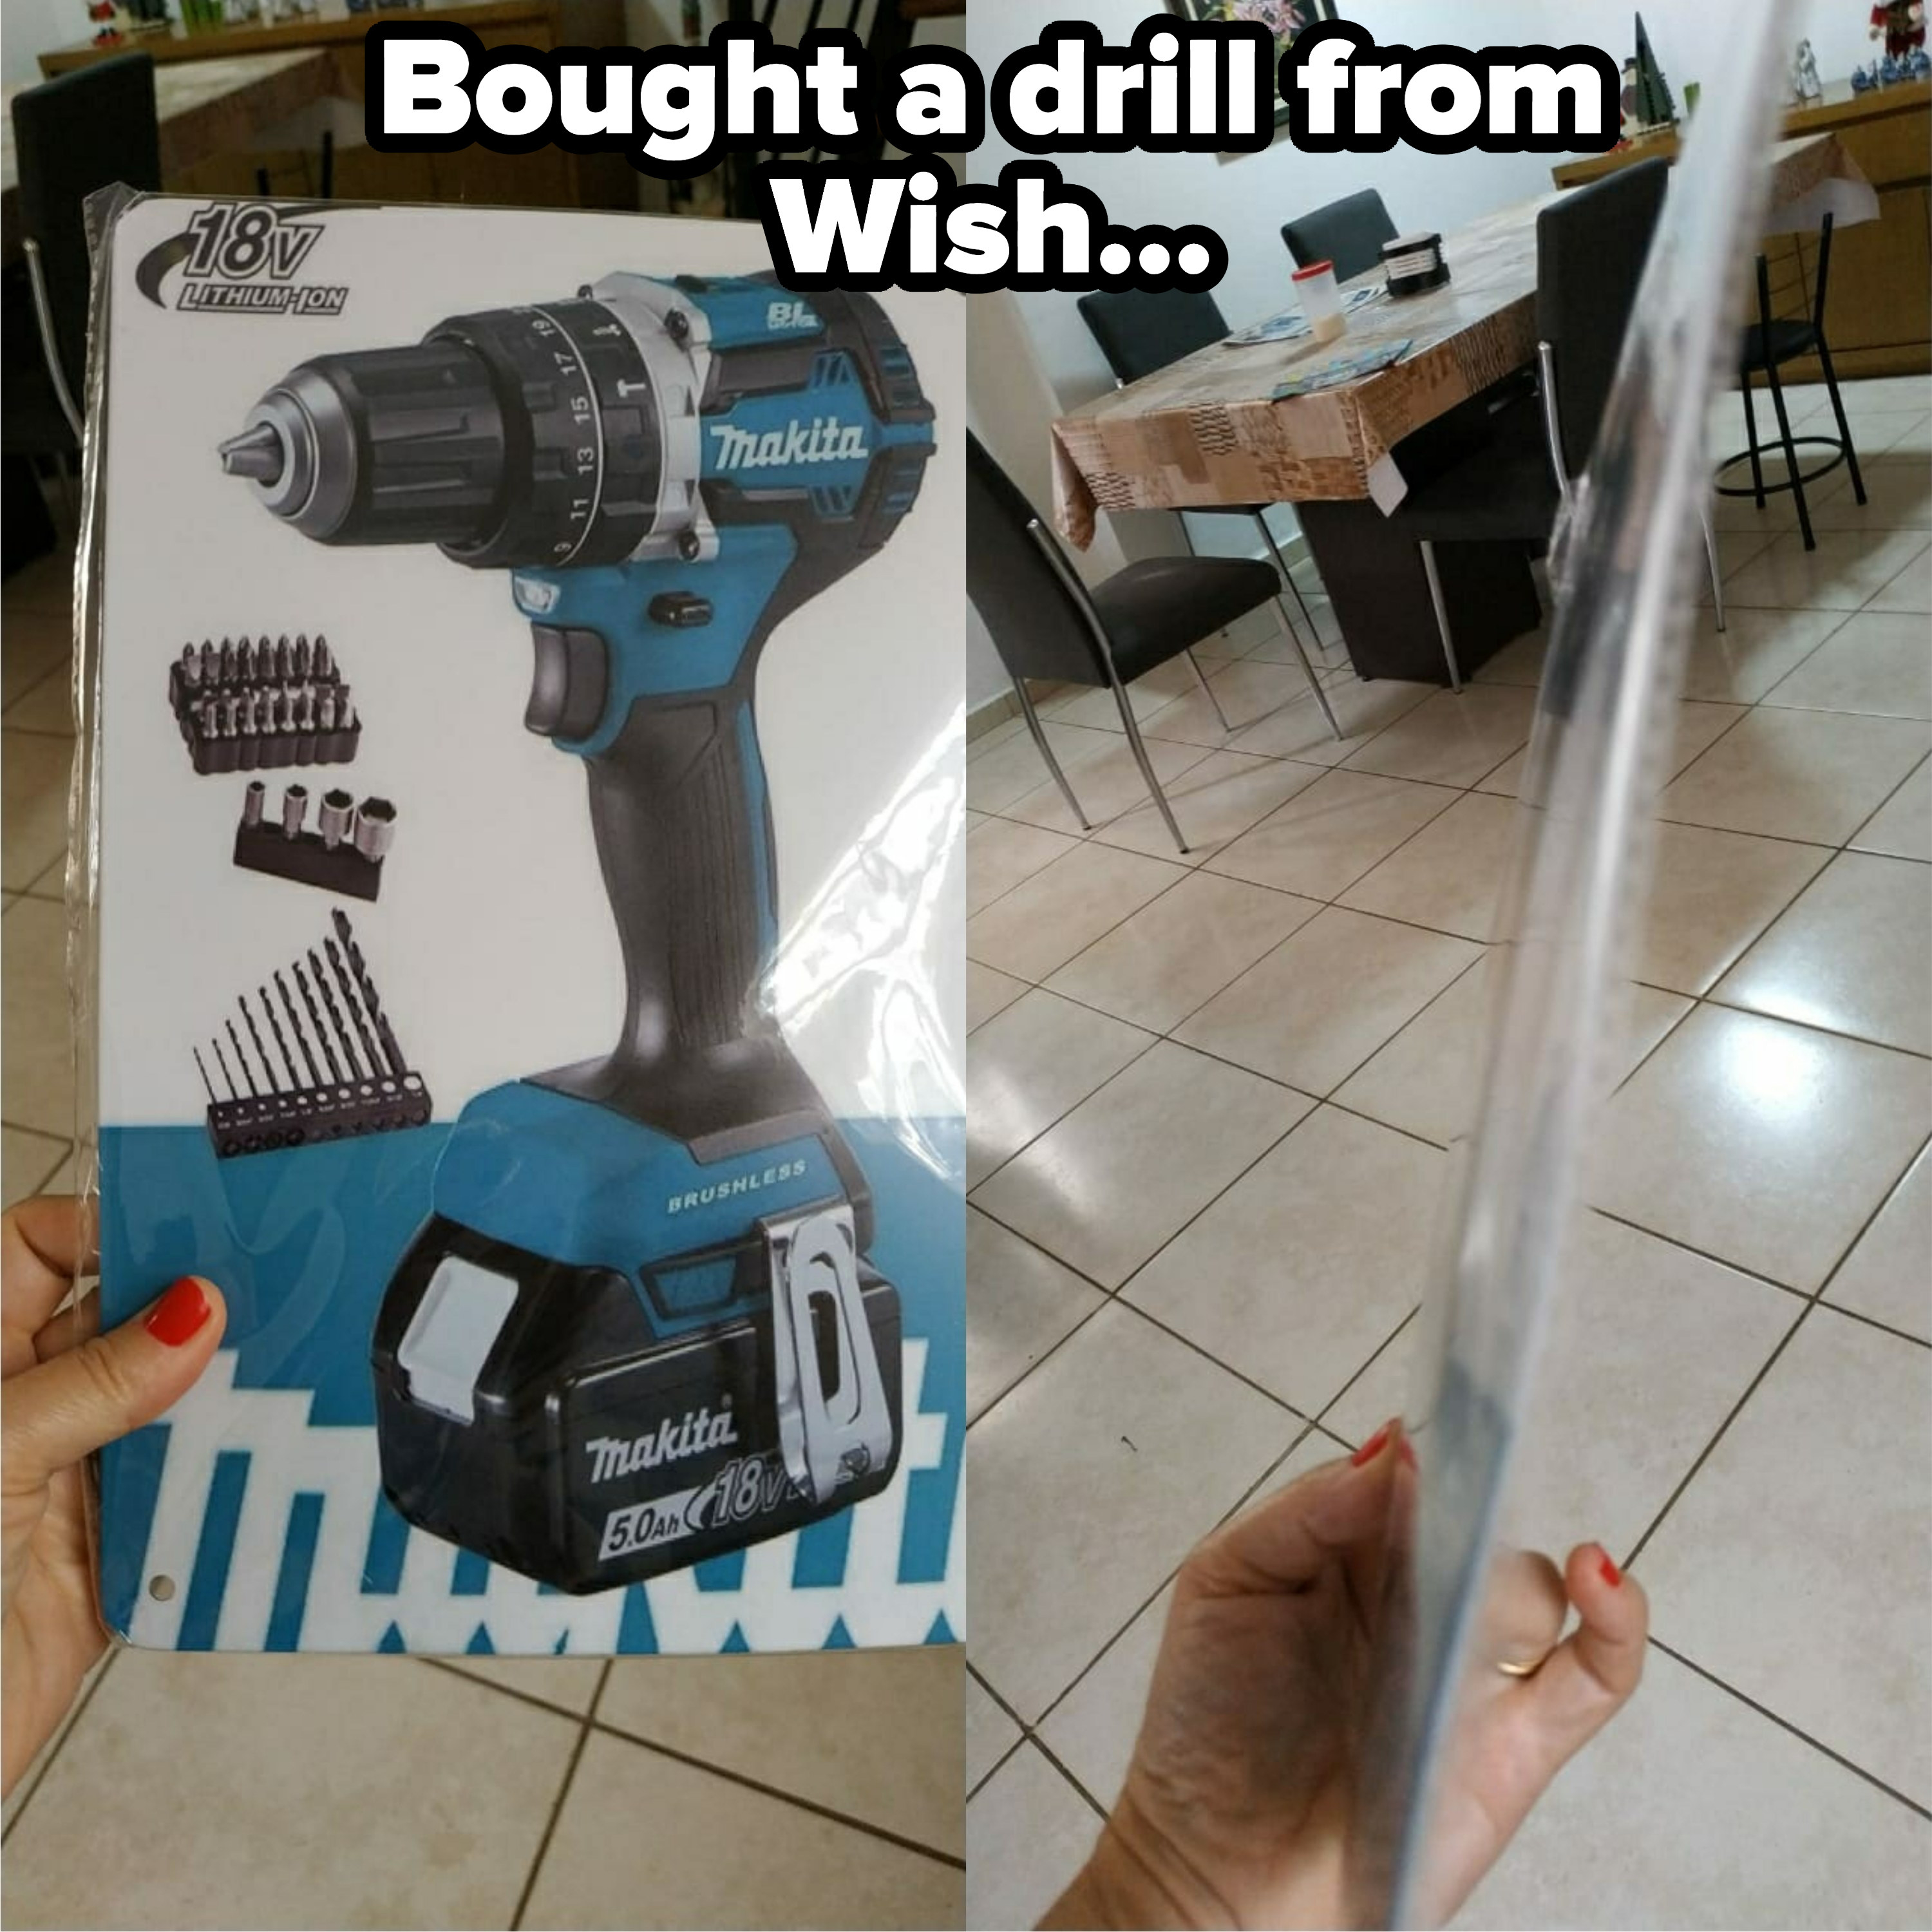 Drill bought from Wish website that is not in the package